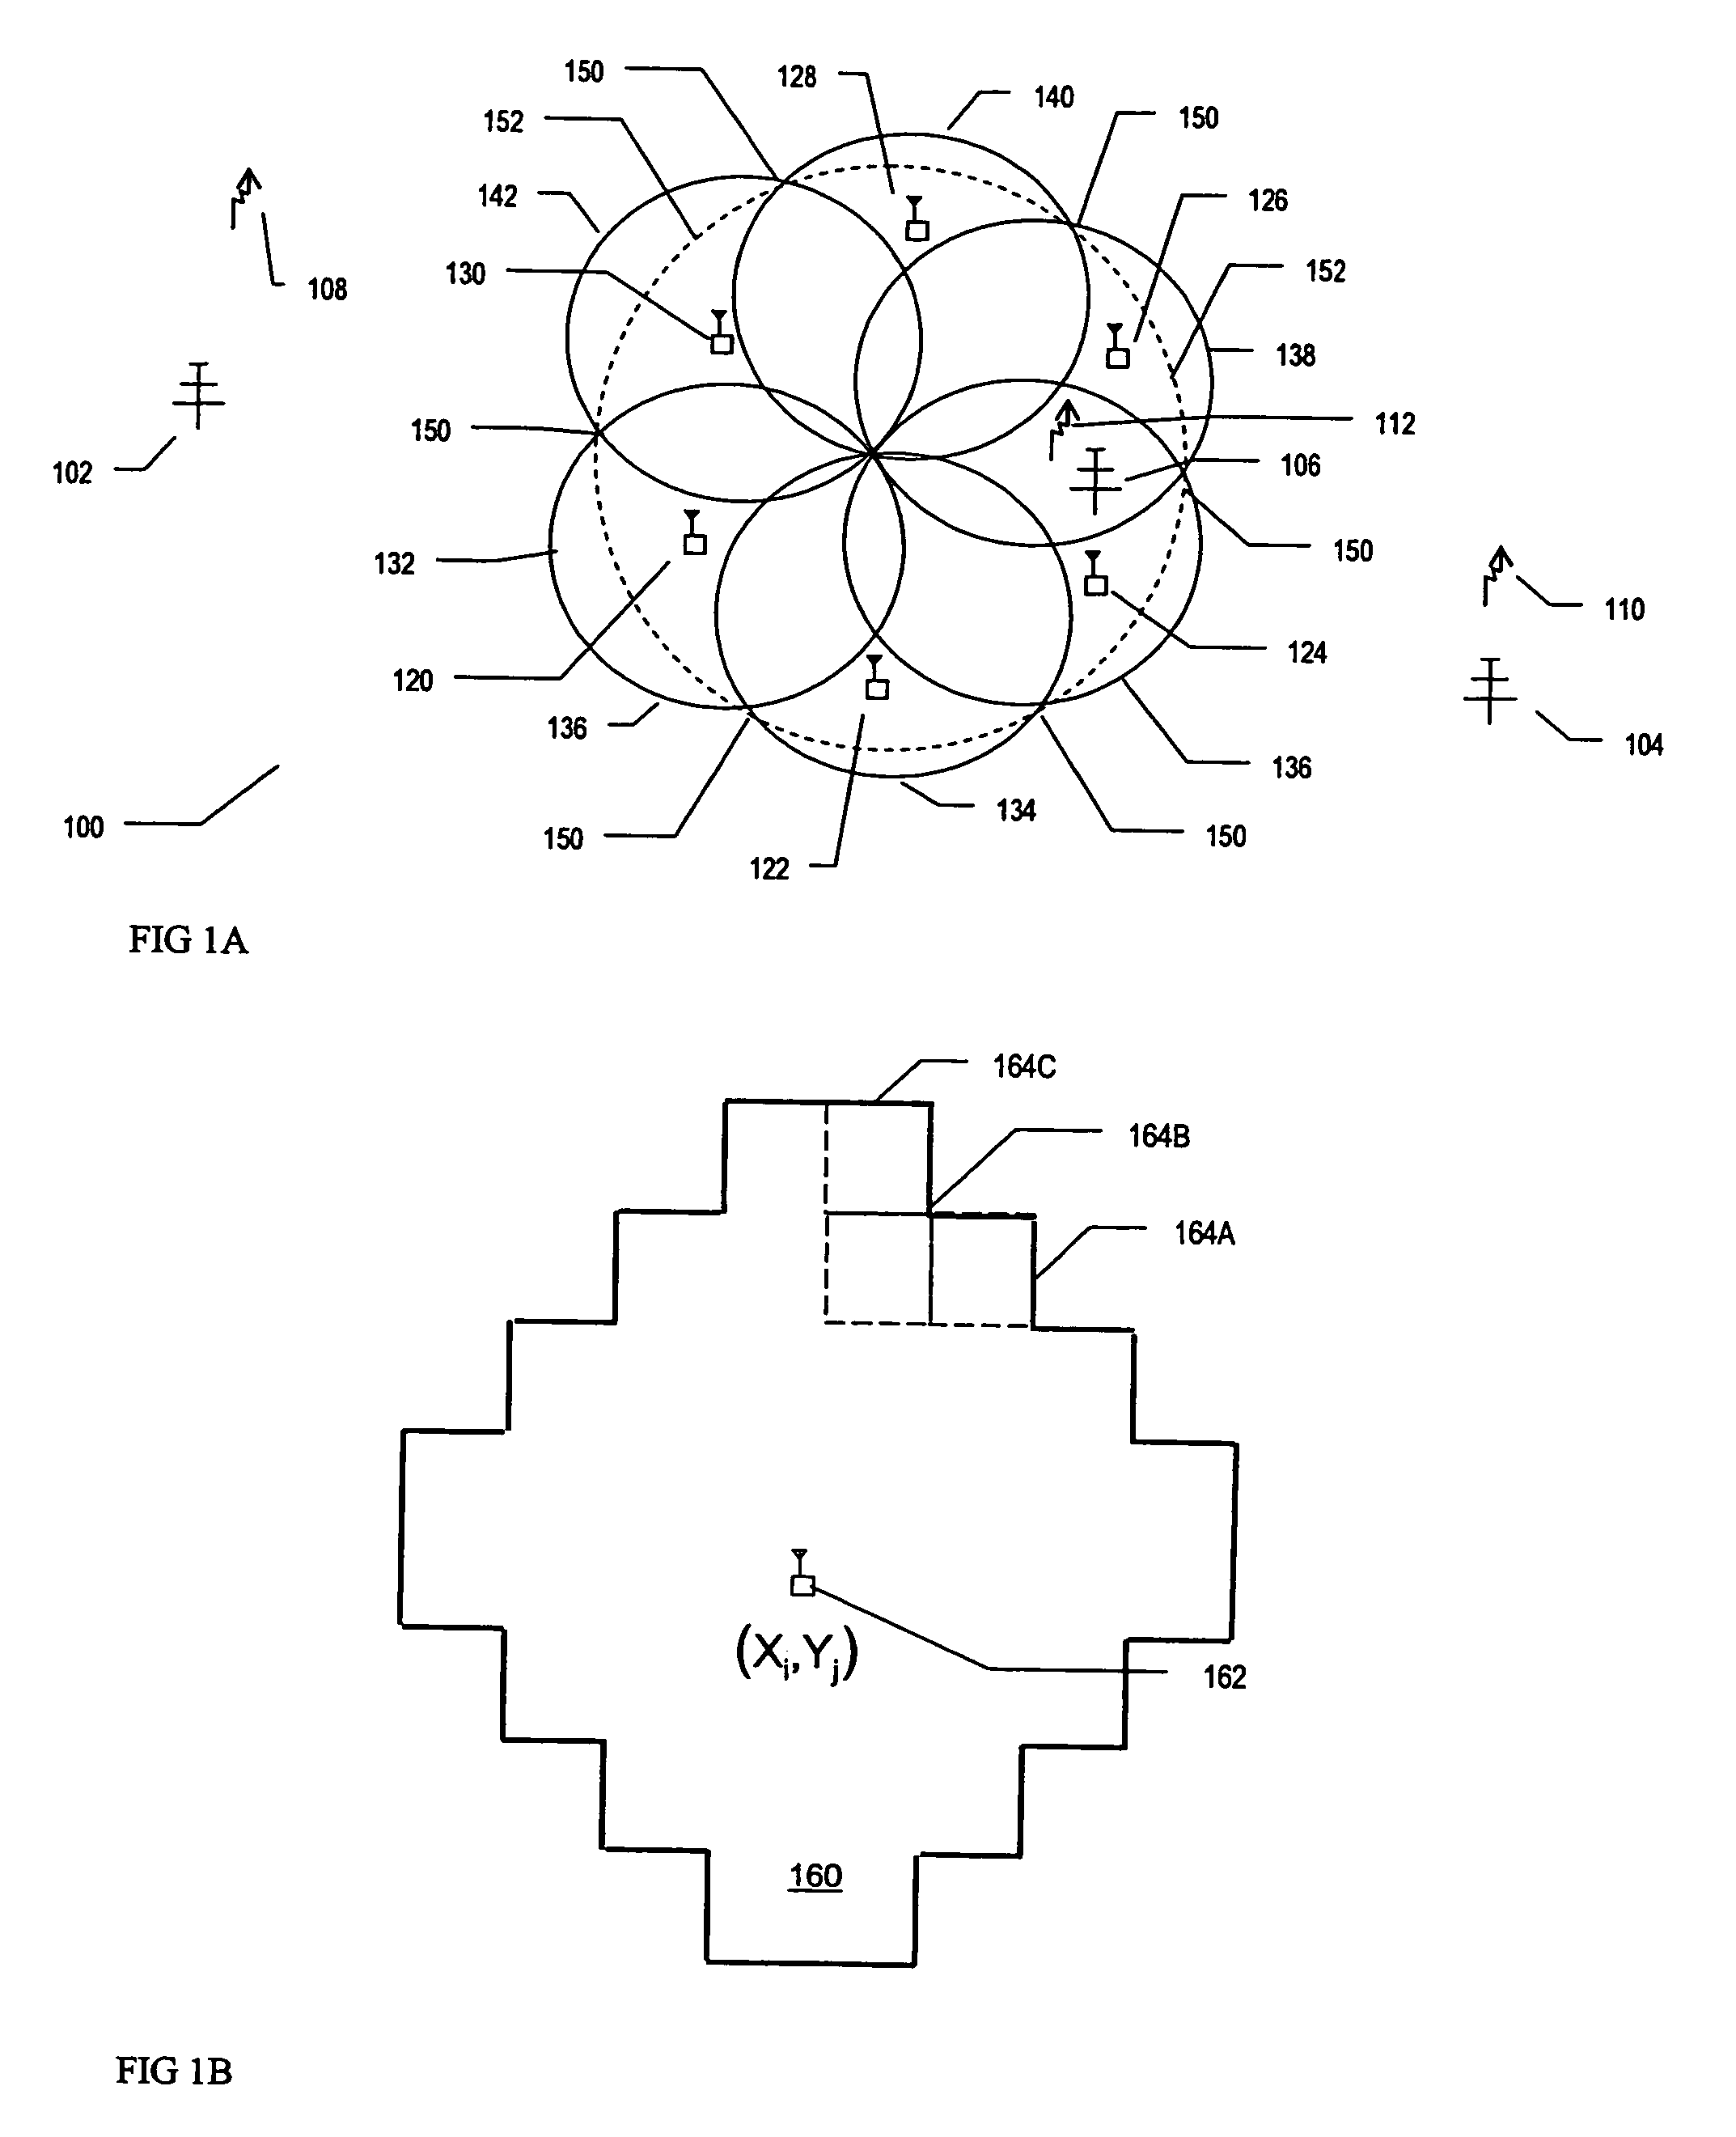 Method and system for determining spectrum availability within a network